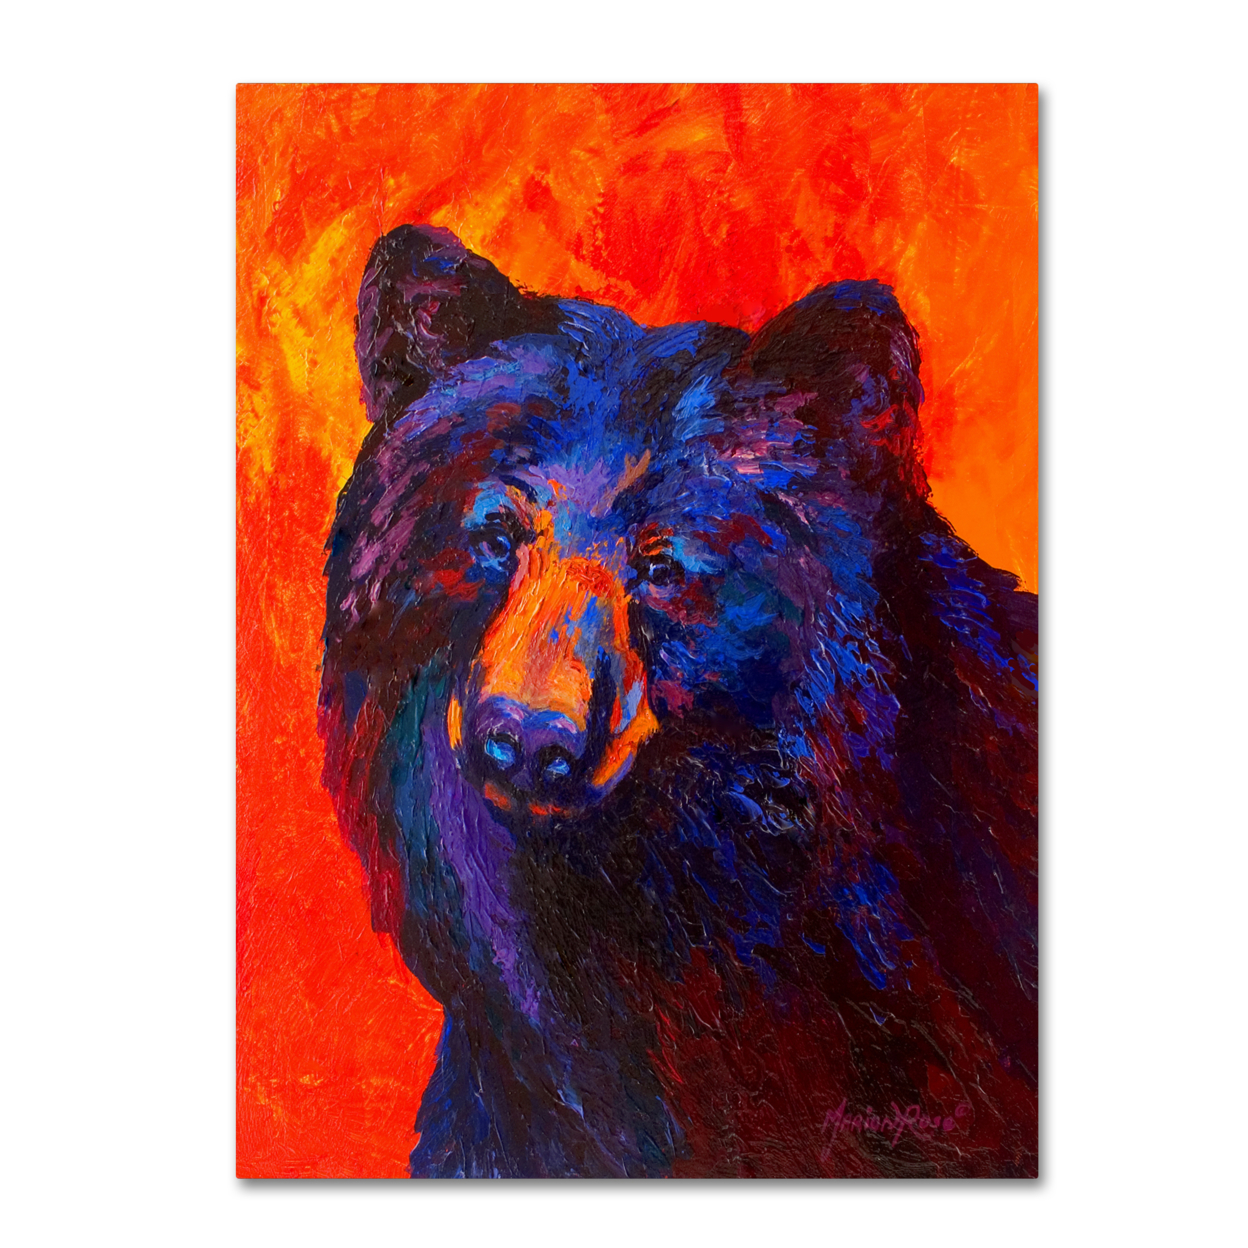 Marion Rose 'Thoughtful Black Bear' Ready To Hang Canvas Art 24 X 32 Inches Made In USA